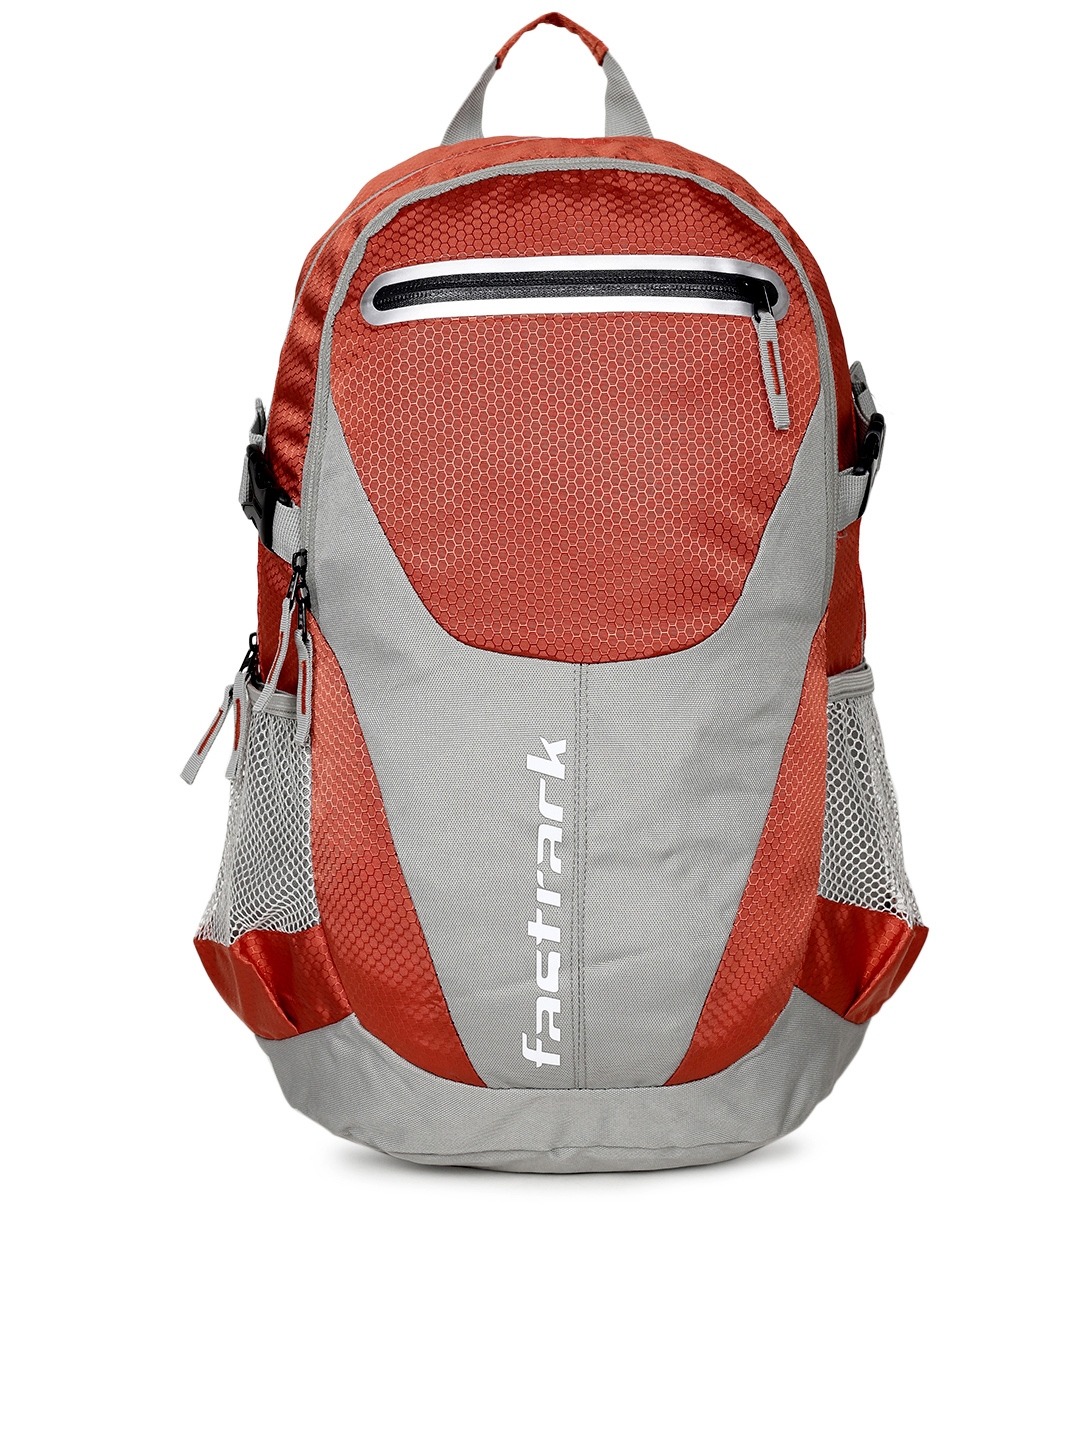 Buy Latest Bags Online for Him and Her | Fastrack